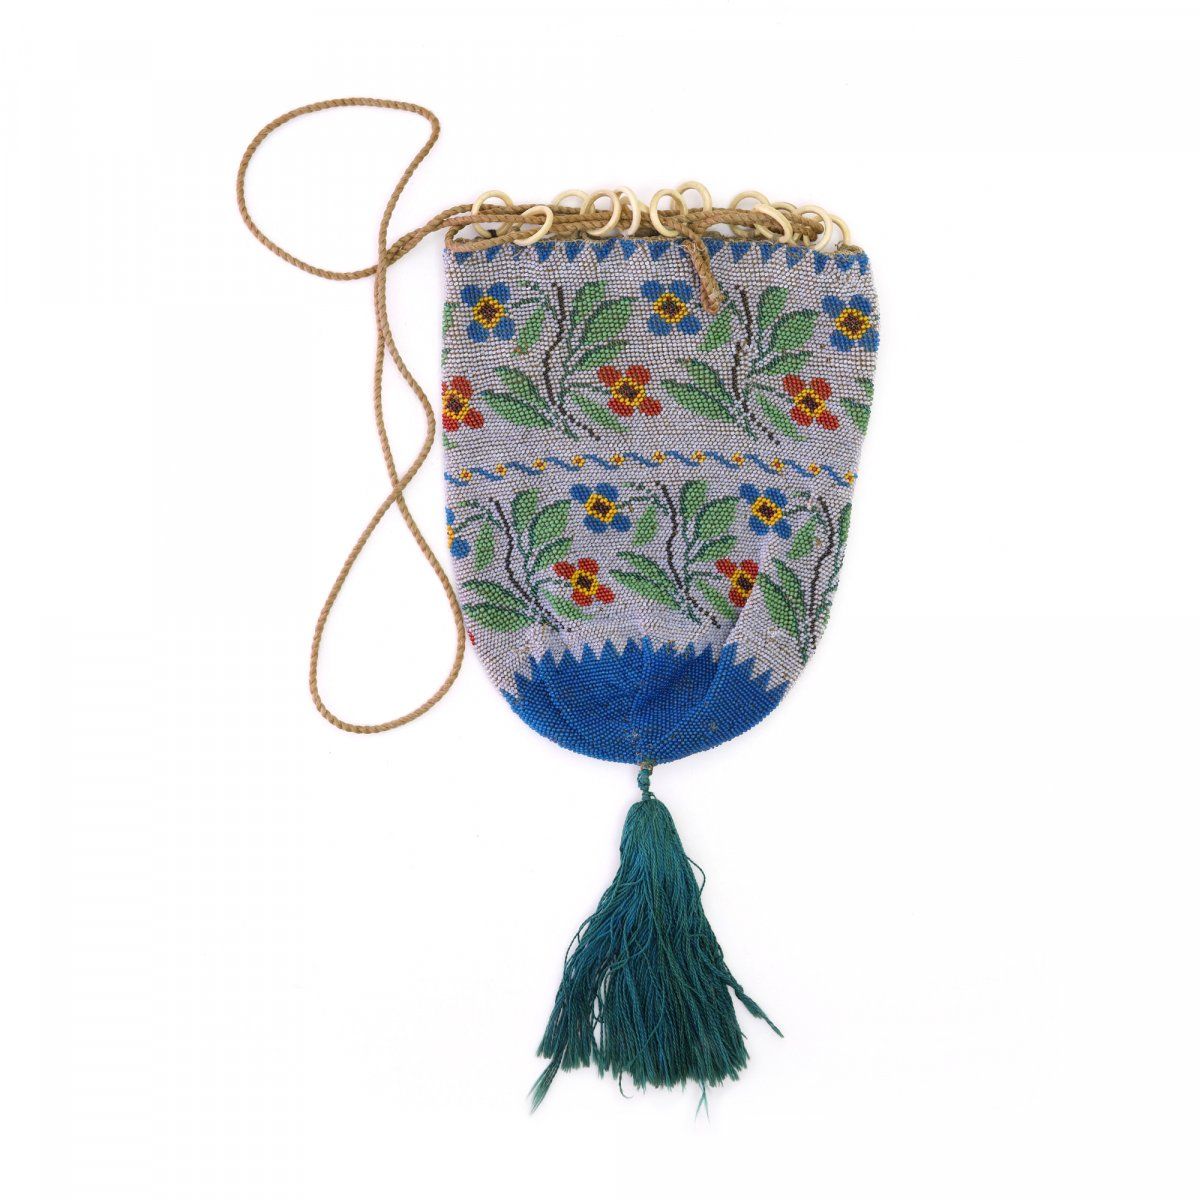 Null Pouch with stylised flowers, mid-19th century, H. 30 x 15 cm. Knitted polyc&hellip;